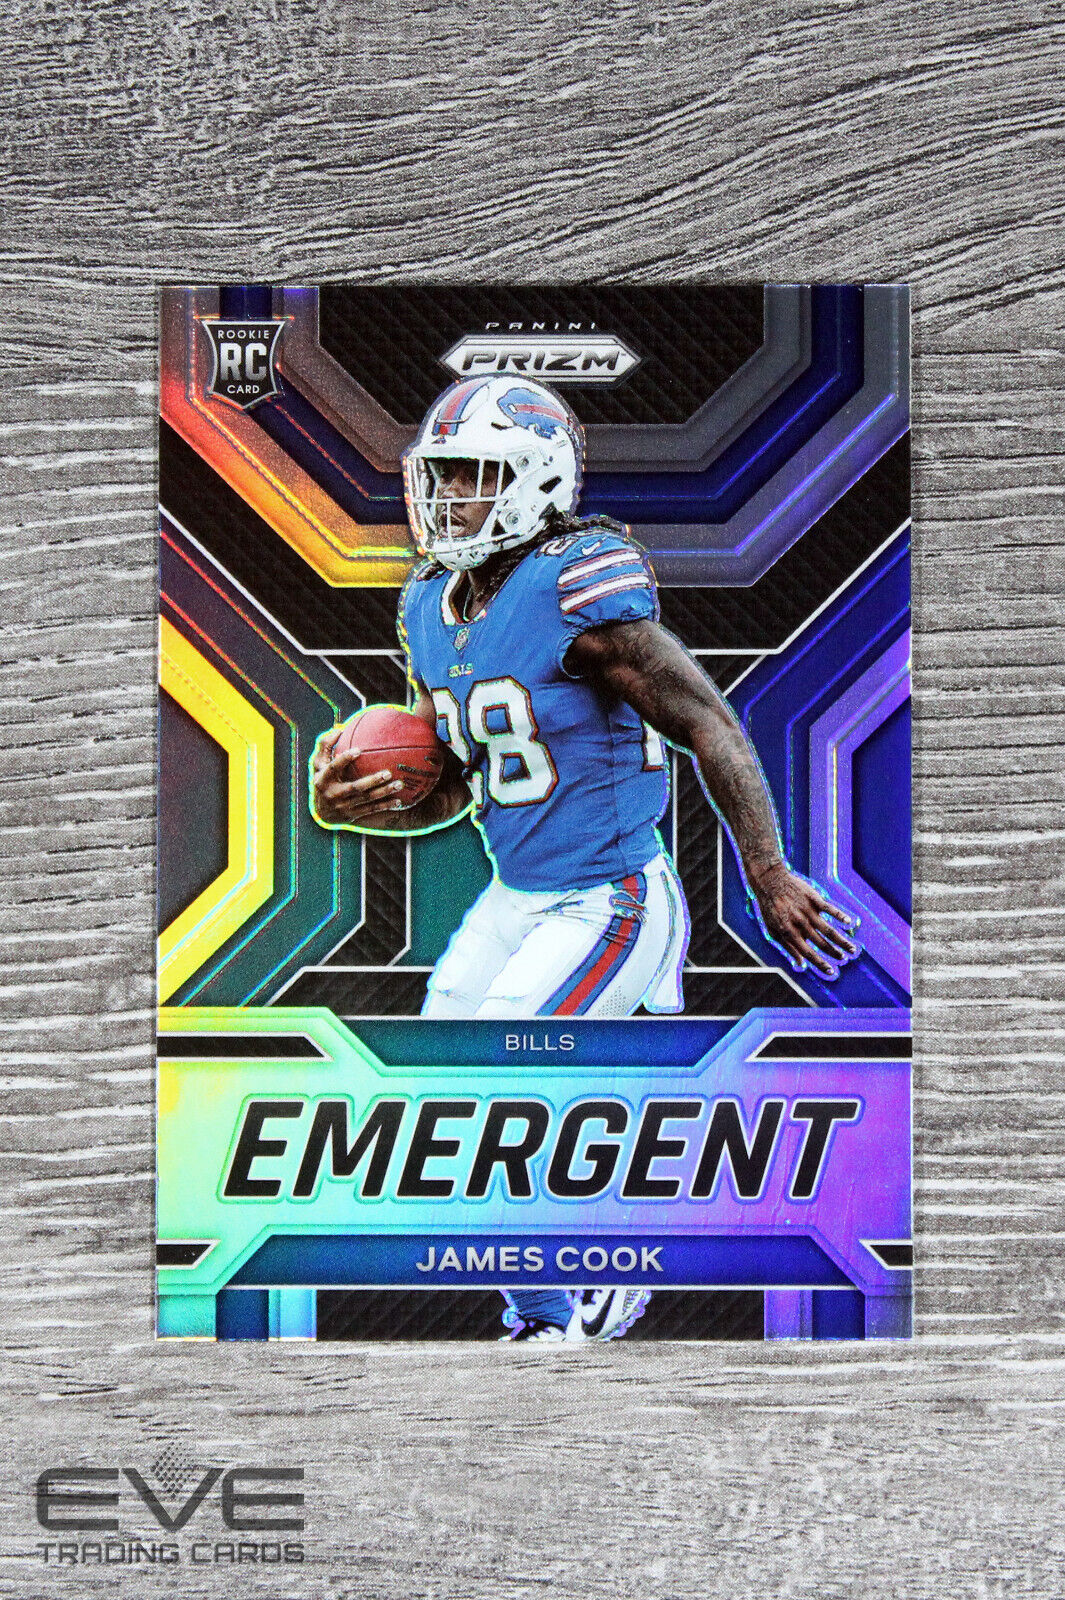 2022 Panini Prizm Football NFL Card #E-13 James Cook Emergent Silver Rookie NM/M